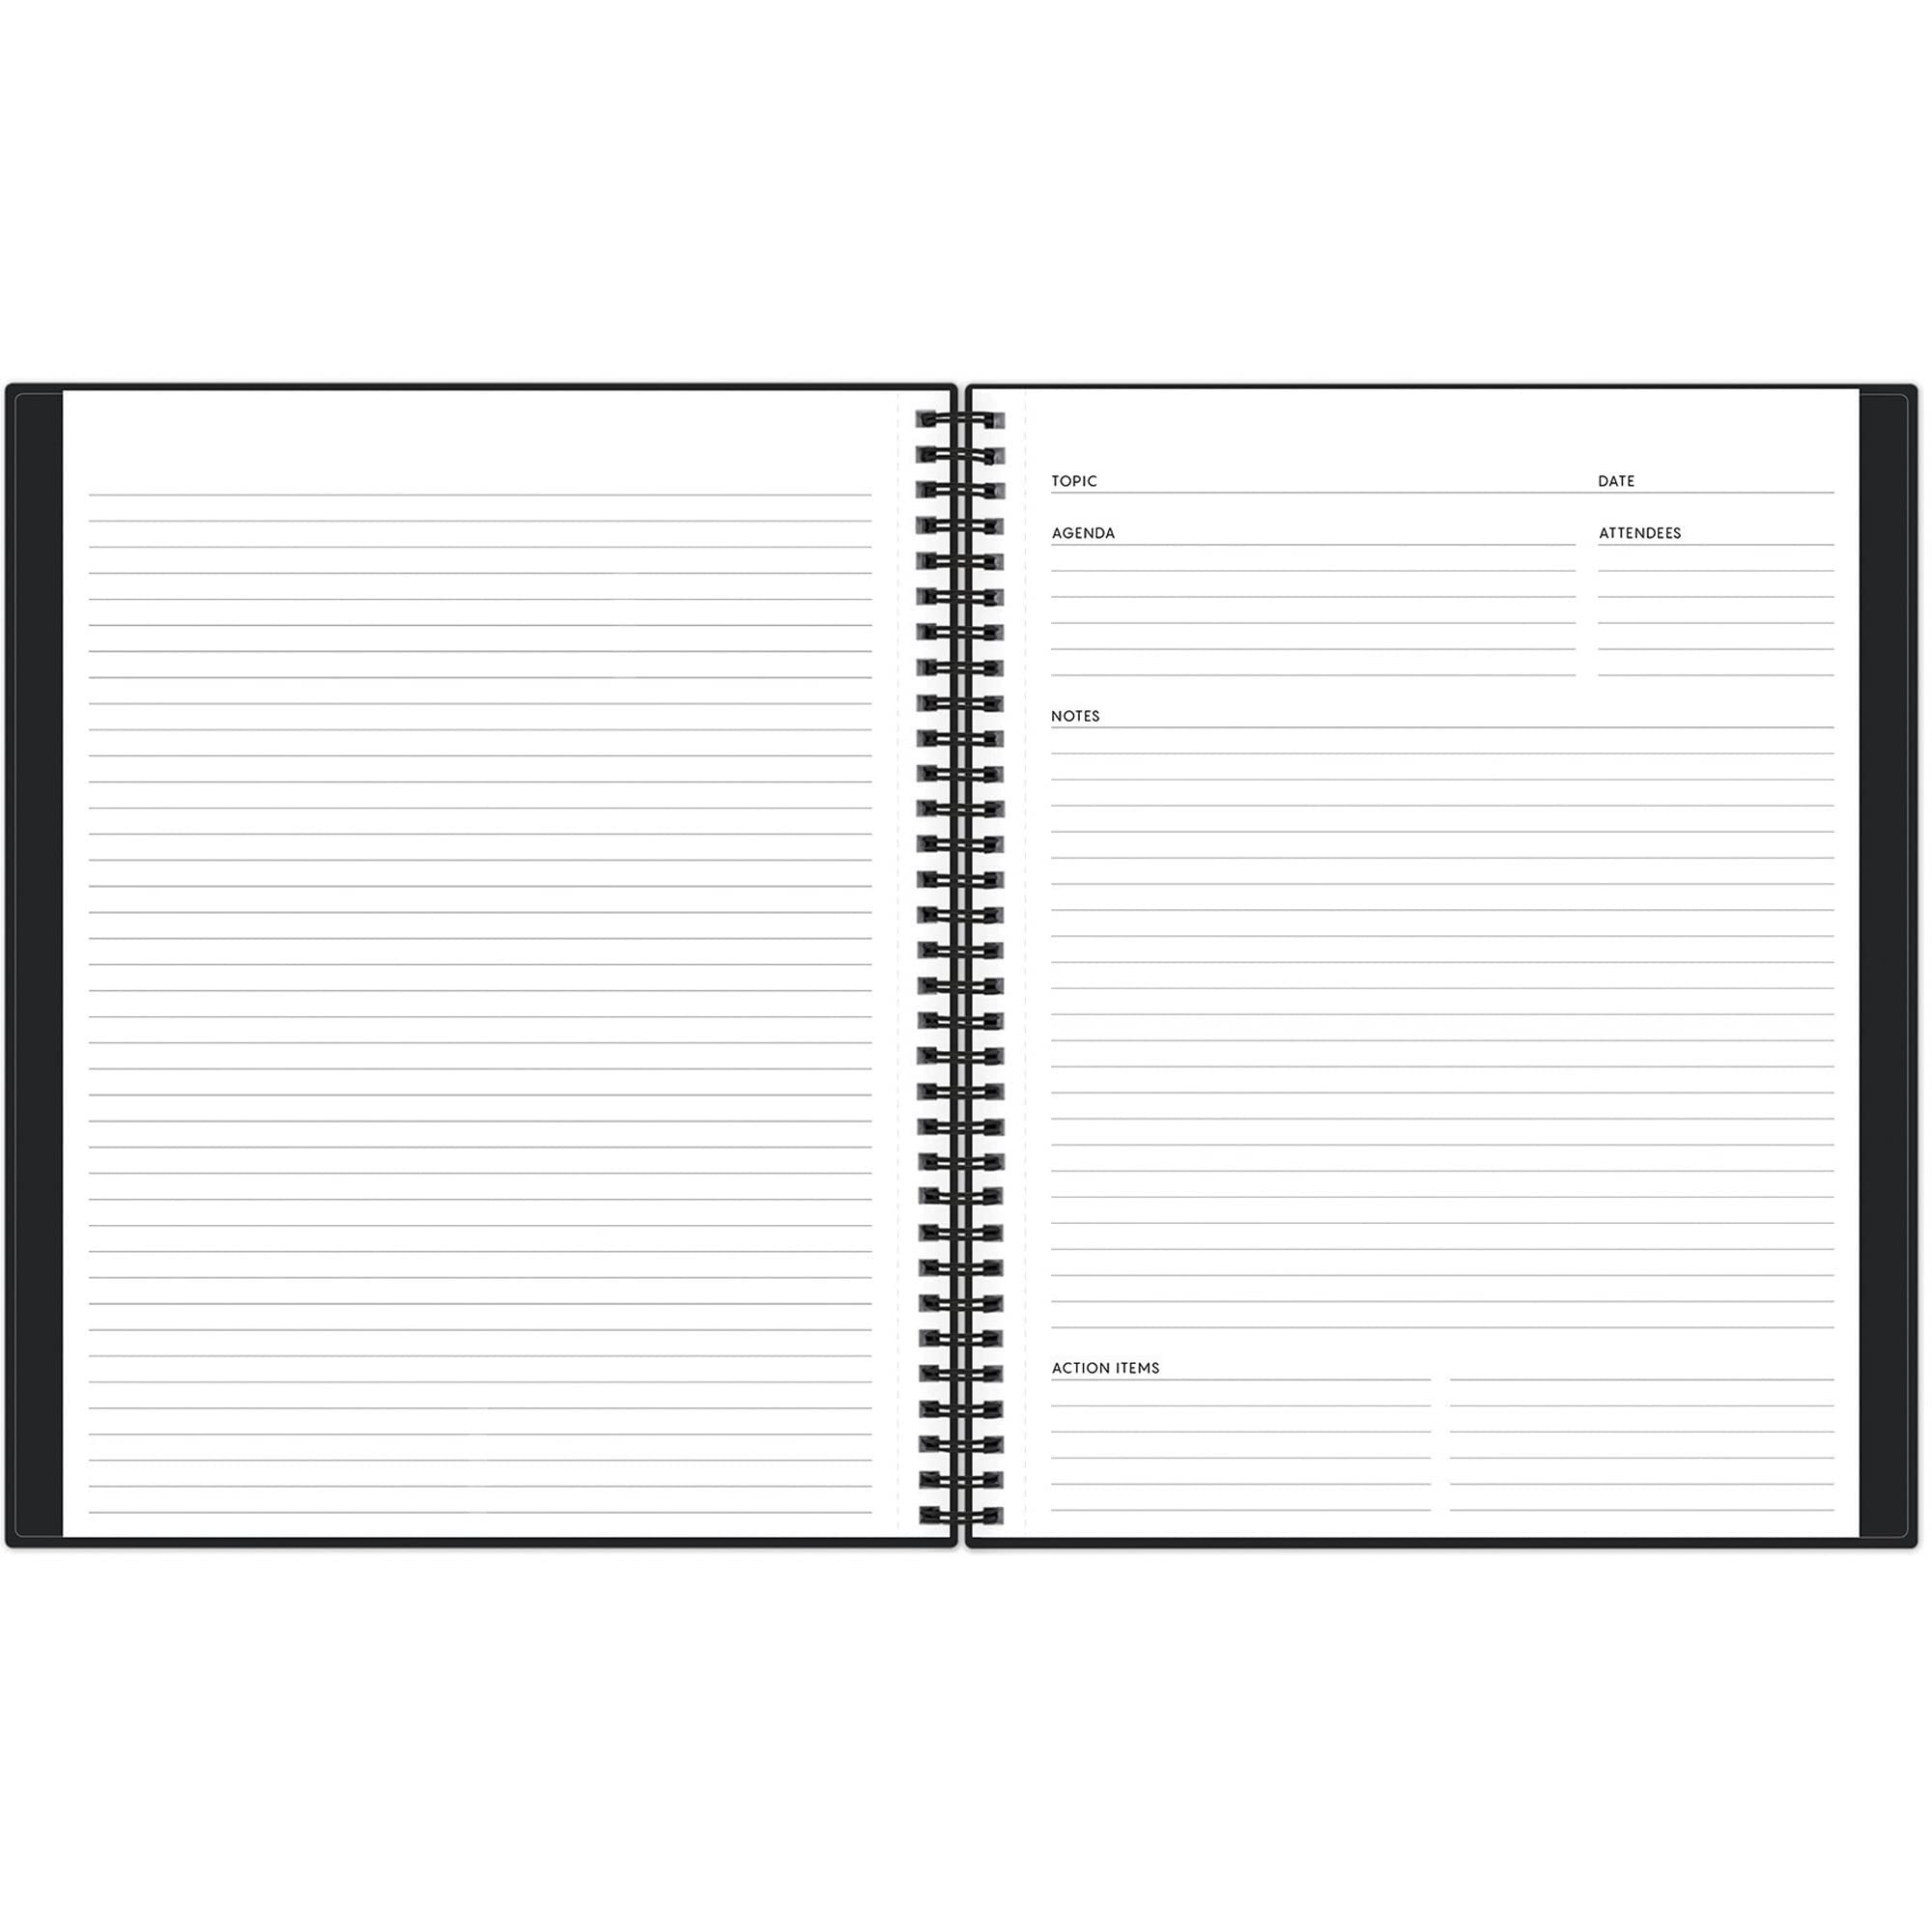 Blue Sky Aligned Notes Professional Business Notebook, Flexible Cover, Twin-Wire Binding, Perforated Pages, 8.5" x 11", Black